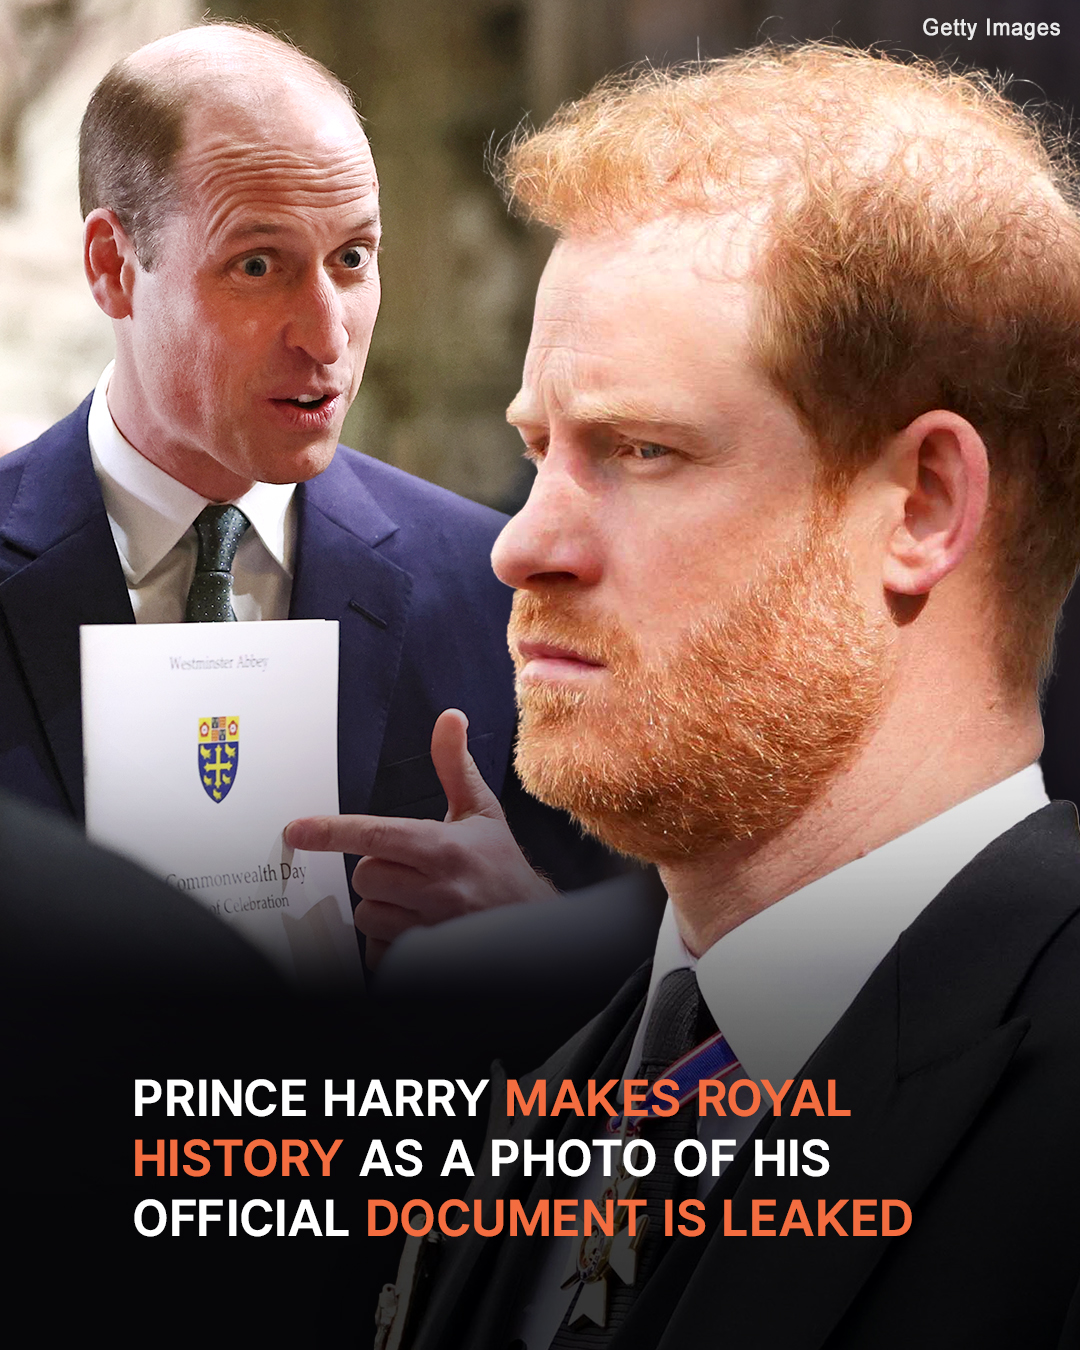 Prince Harry Makes Royal History as a Photo of His Official Document Is Revealed